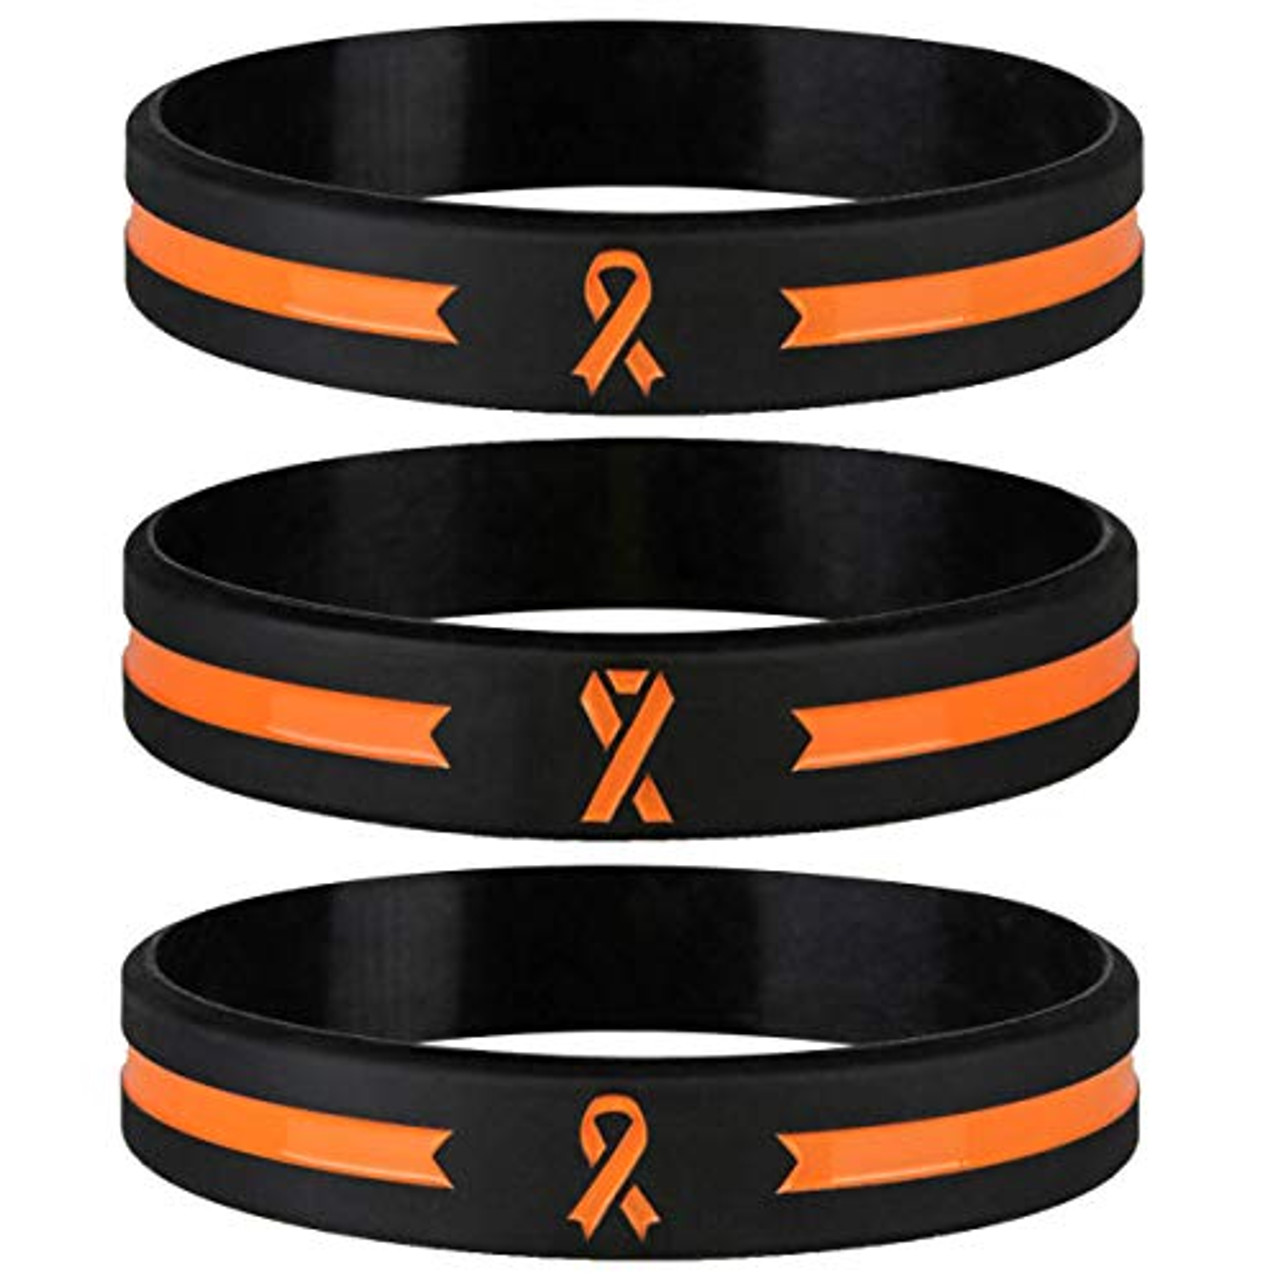 Sainstone Pink Awareness Silicone Bracelets with Saying Mental Health Awareness Ribbon Bracelets Patients Survivors Family Friends Cancer & Cause Awareness Wristbands Gift for Men Women 